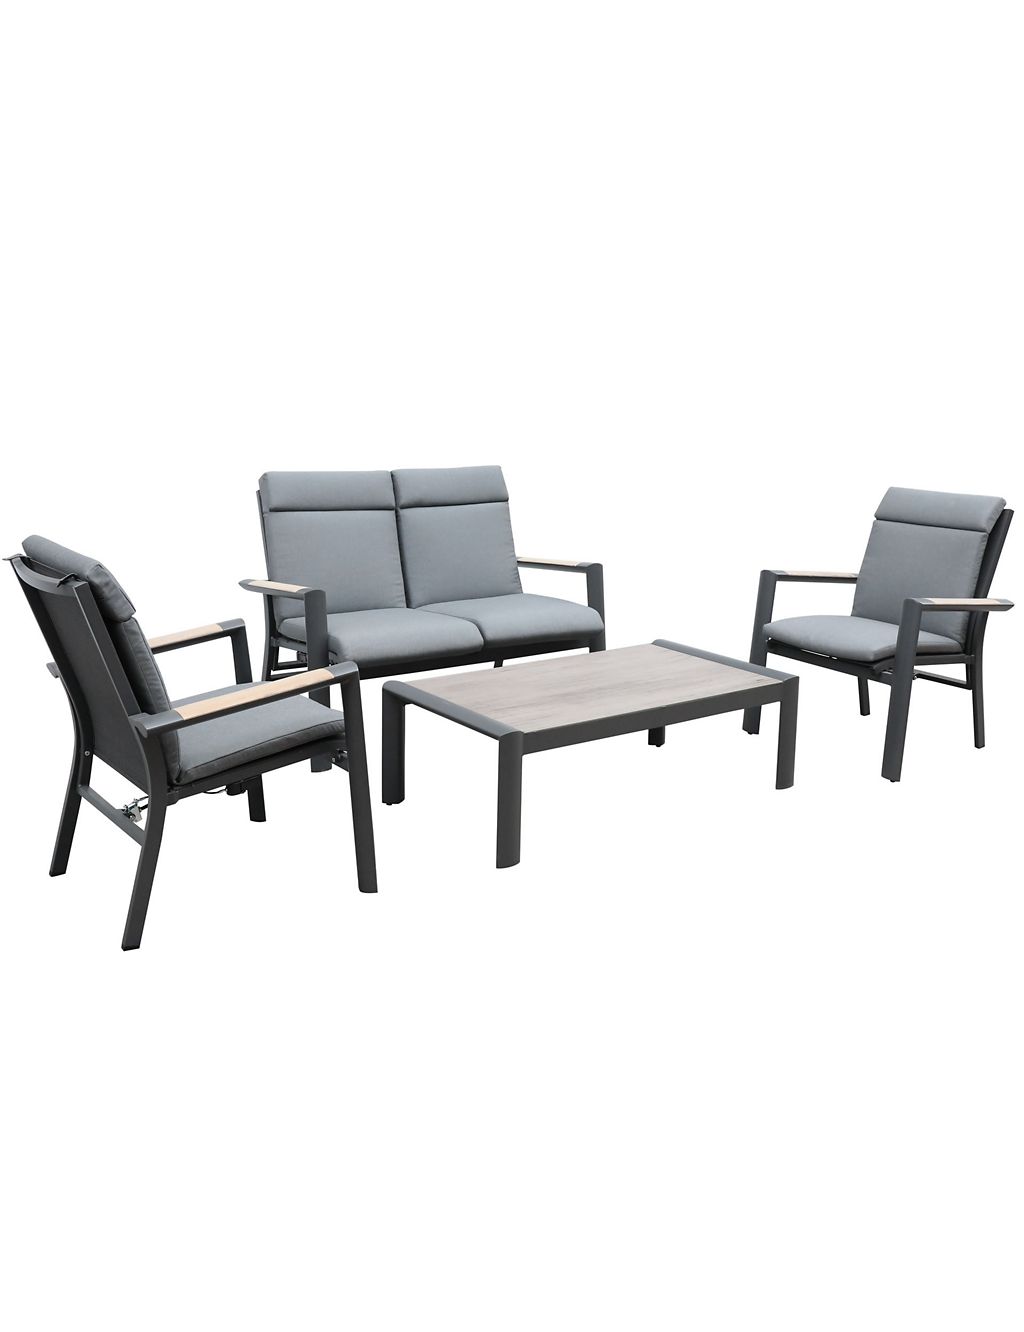 Surf Active 4 Seater Garden Lounge Set 1 of 5